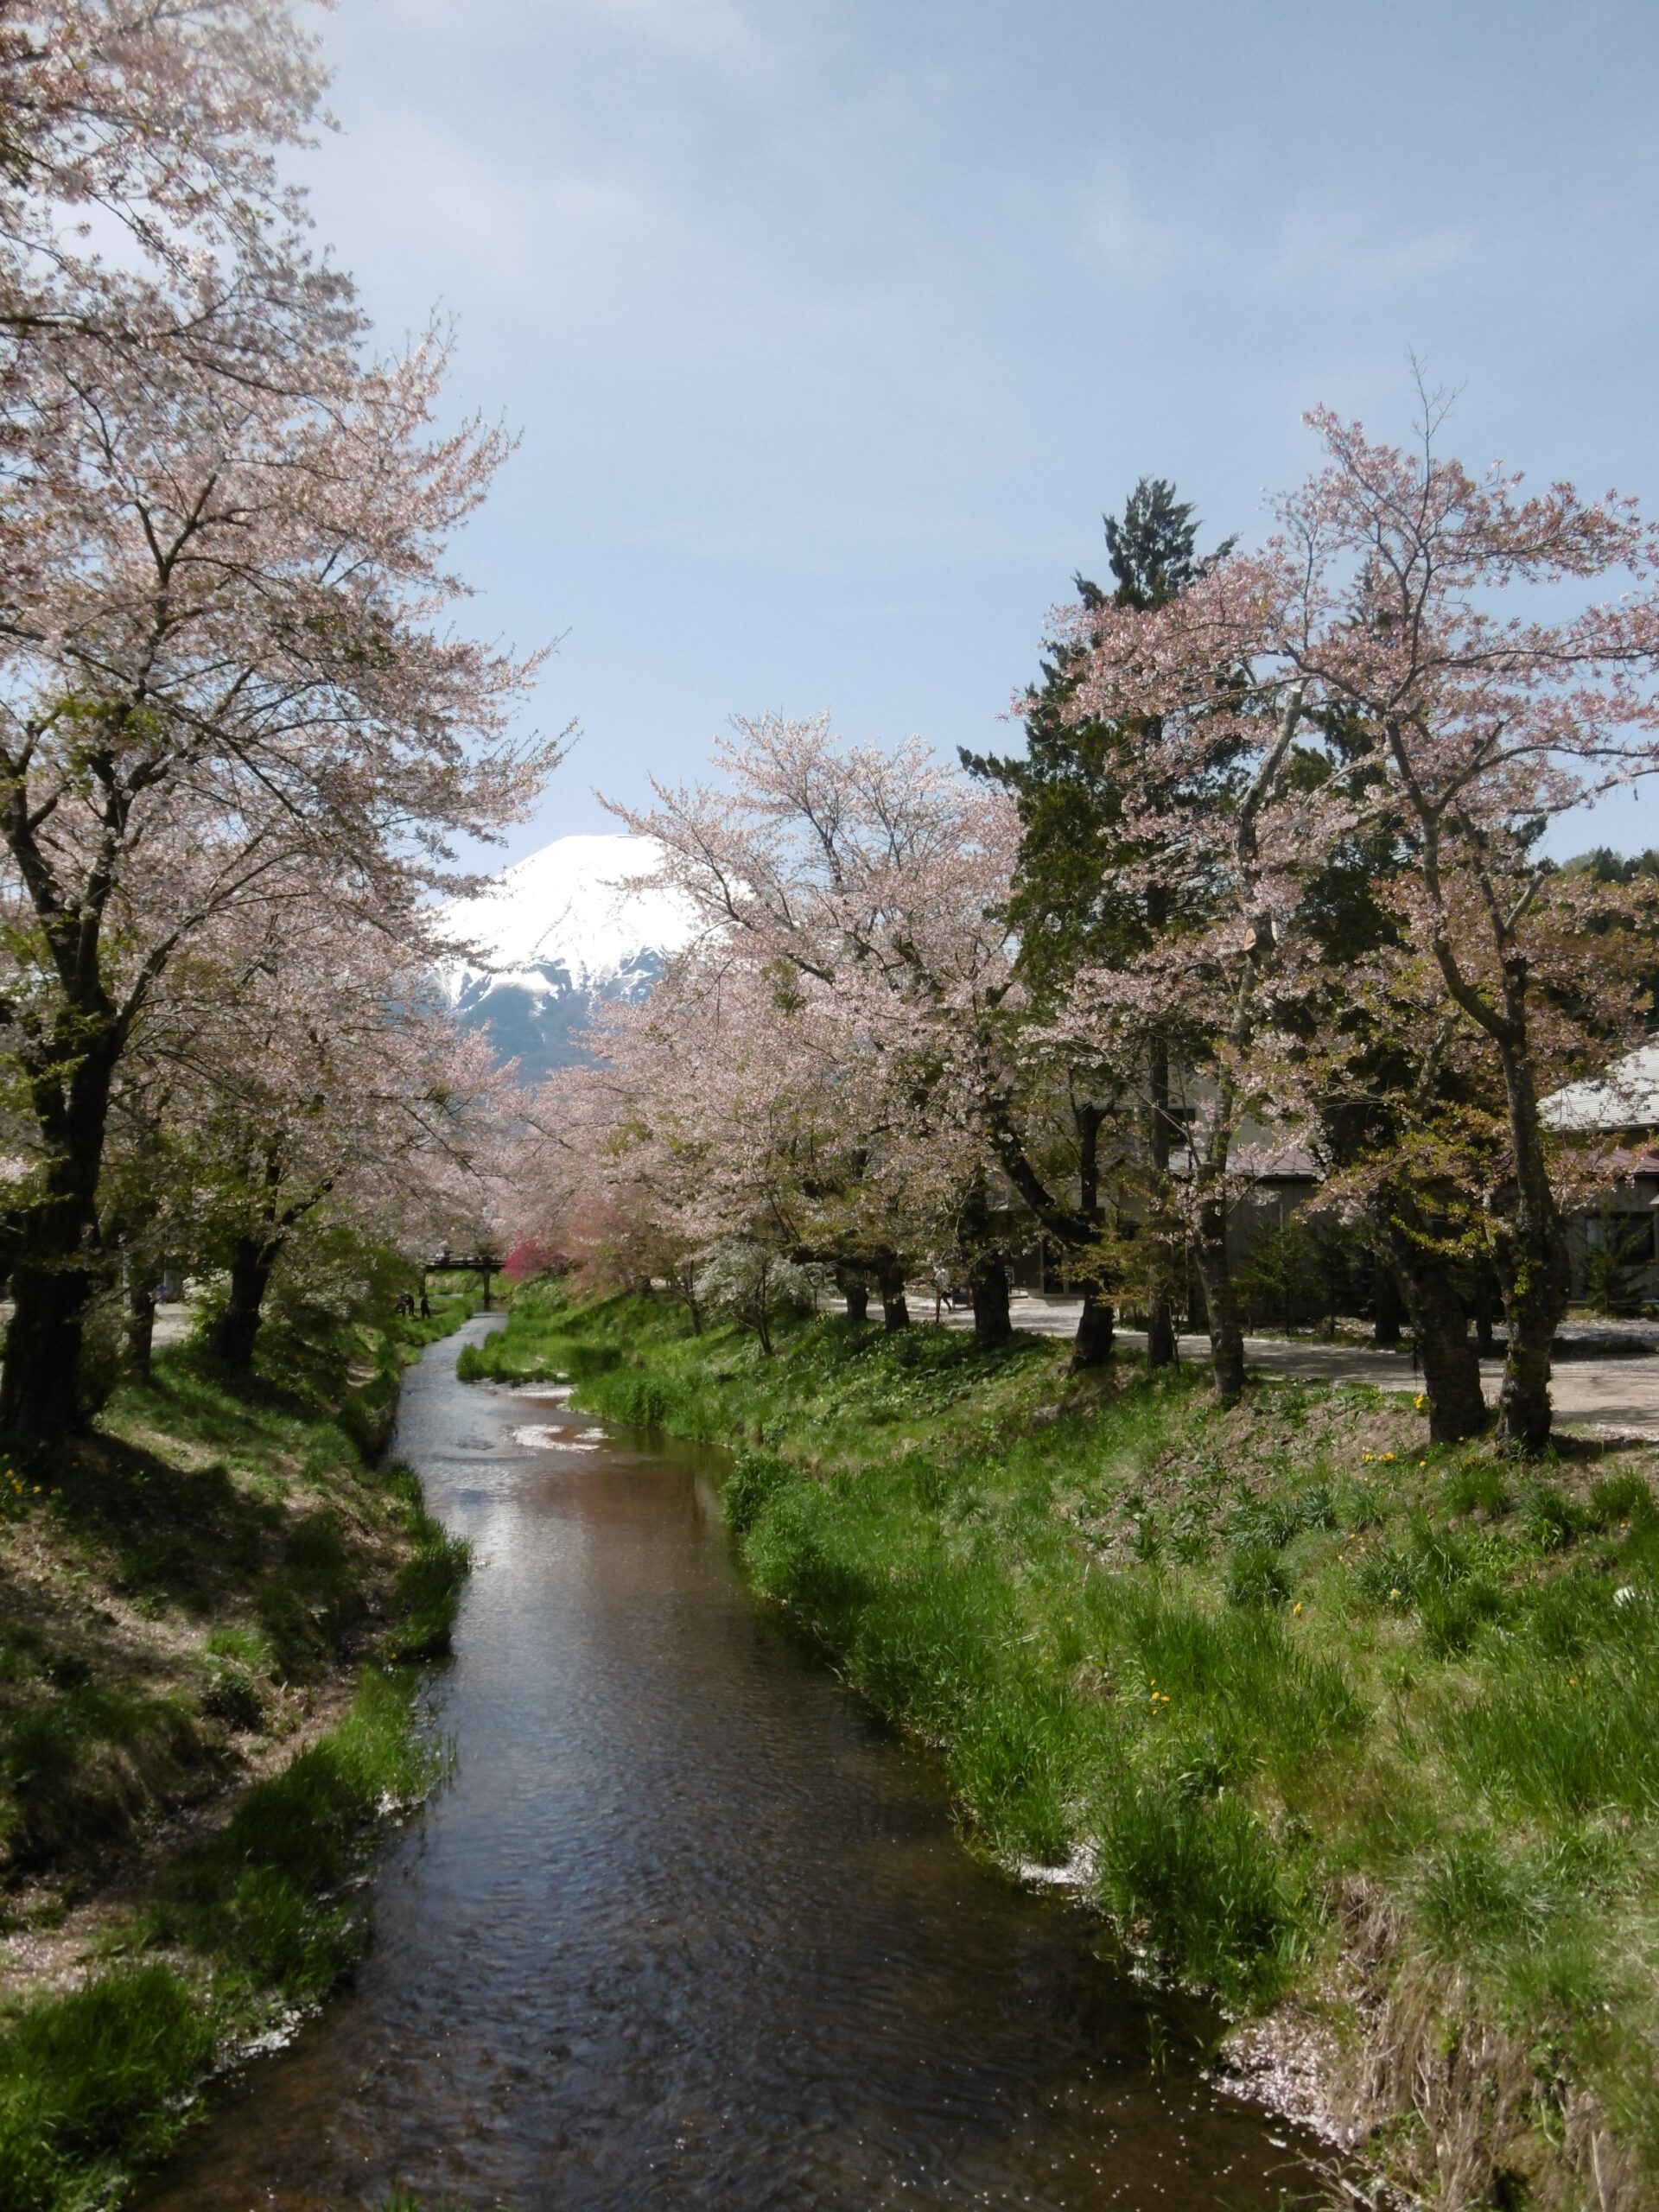 Trip to Japan: A Tale of Tradition and Modernity